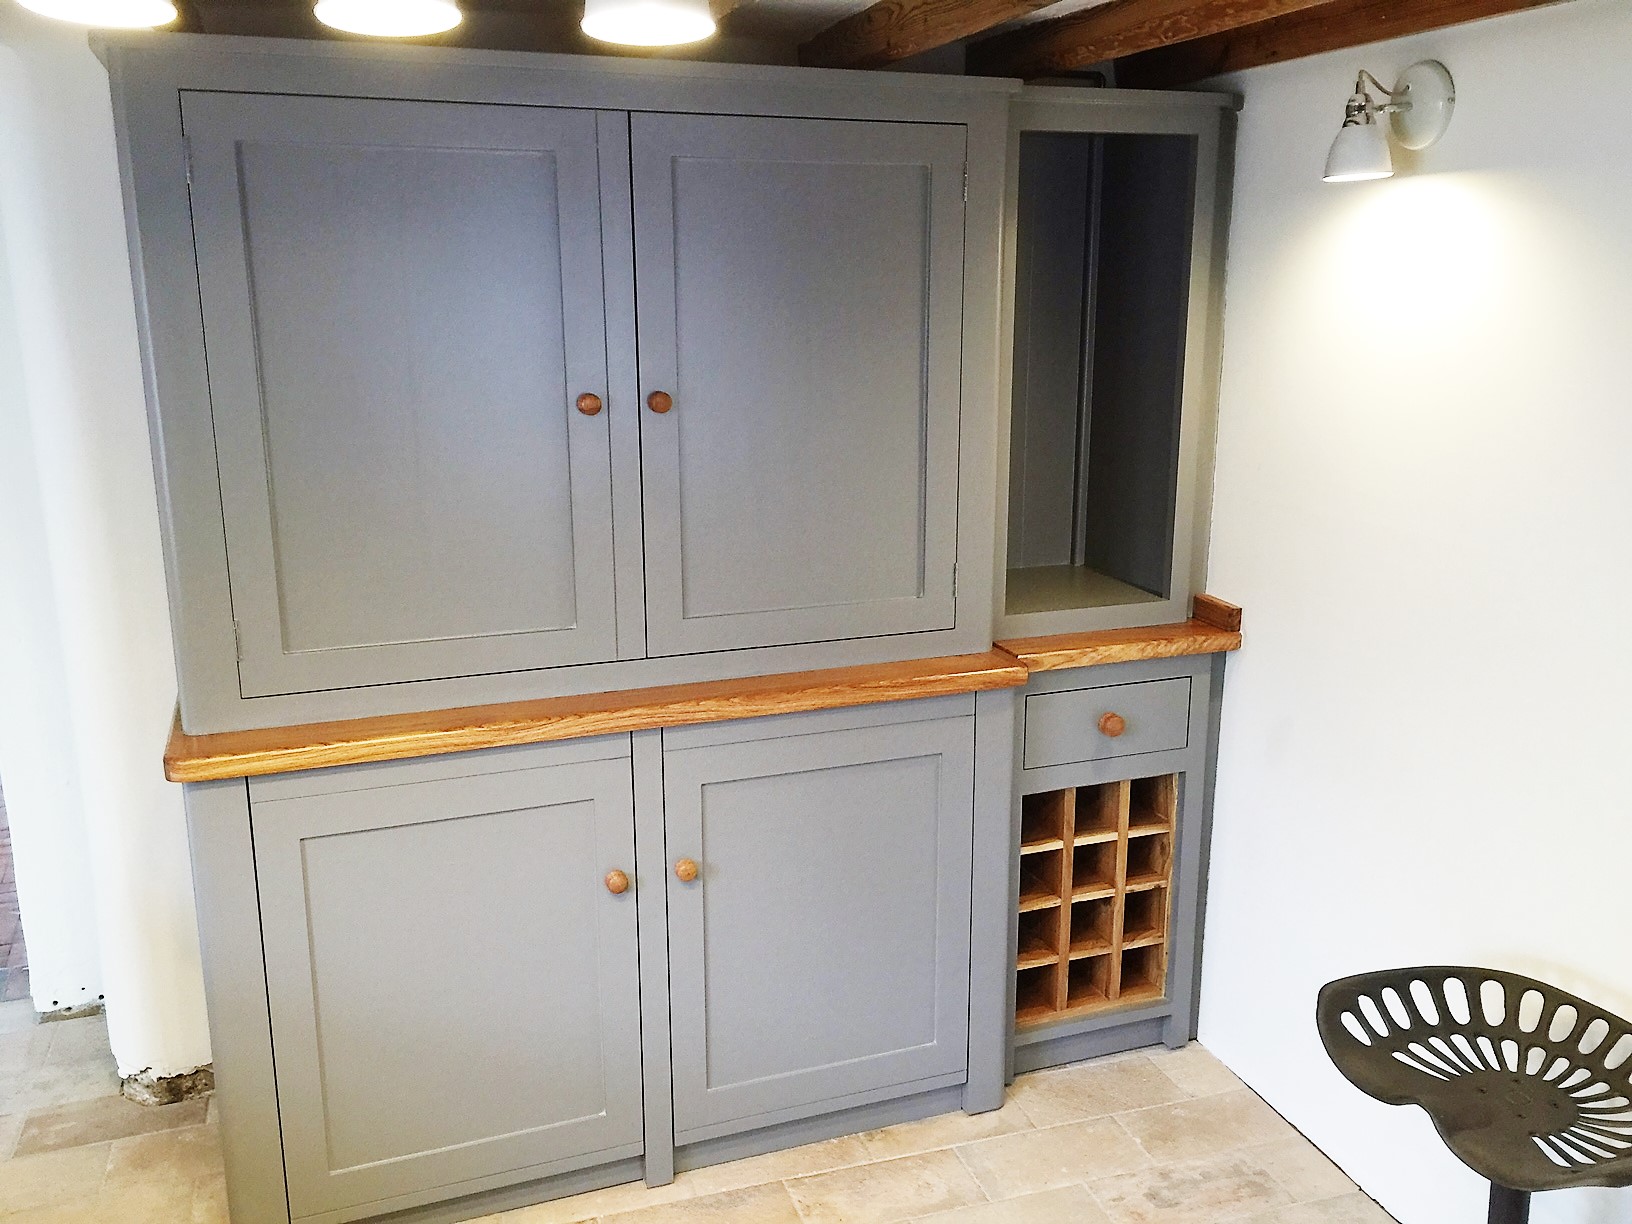 Solid wood shaker style kitchen units hand built with belfast sink.